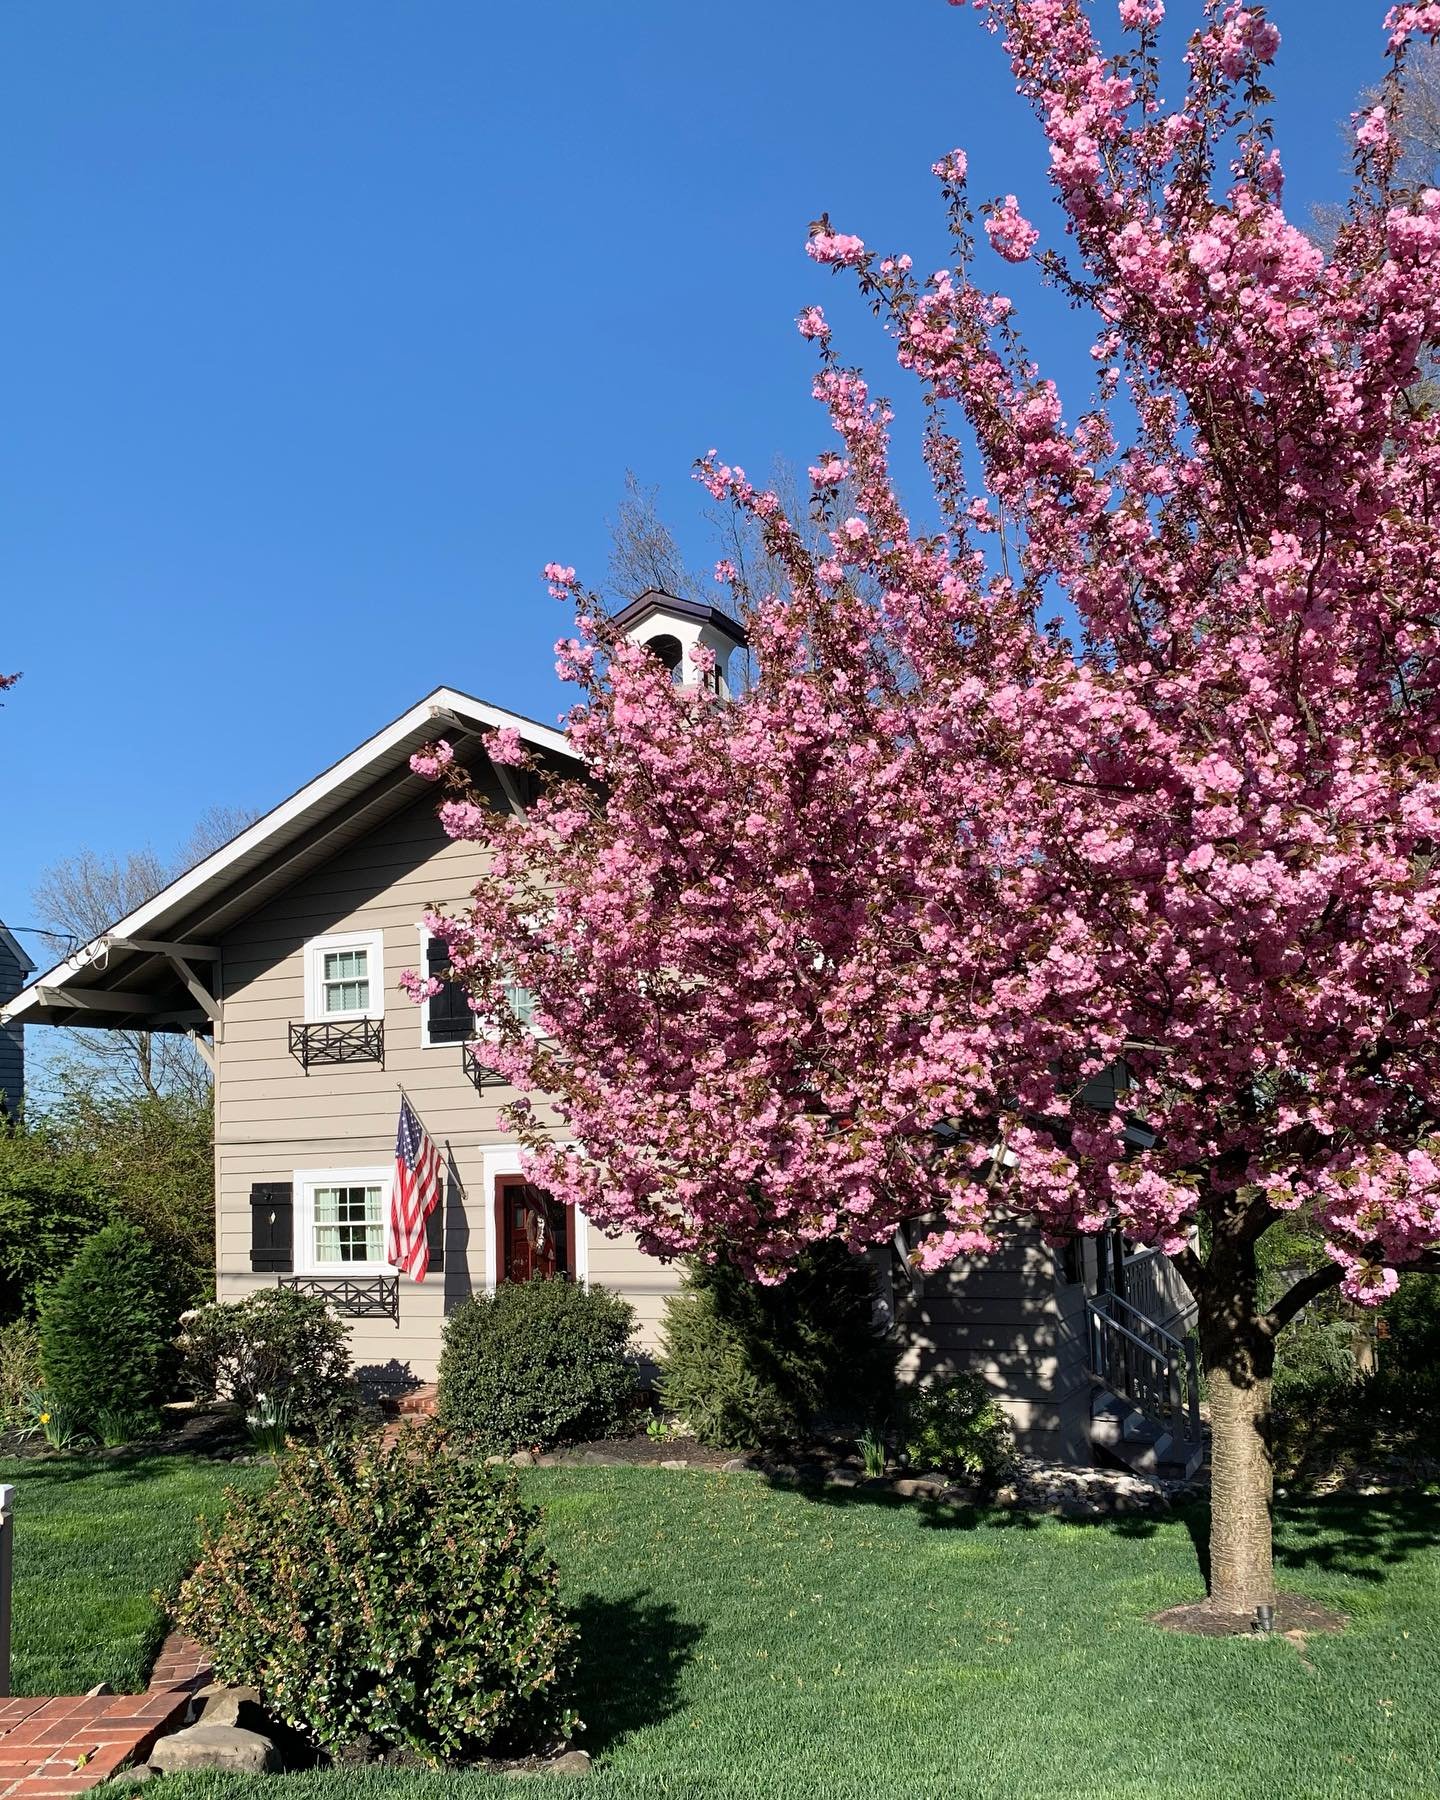 Our Cherry Tree is really putting on quite a show! 🌸 She&rsquo;s such a lovely welcome! 
I&rsquo;ve been thinking about how I welcome others because of my interview with Hospitality Expert Amber Clark @acordialhome 
Amber&rsquo;s motto is Connection